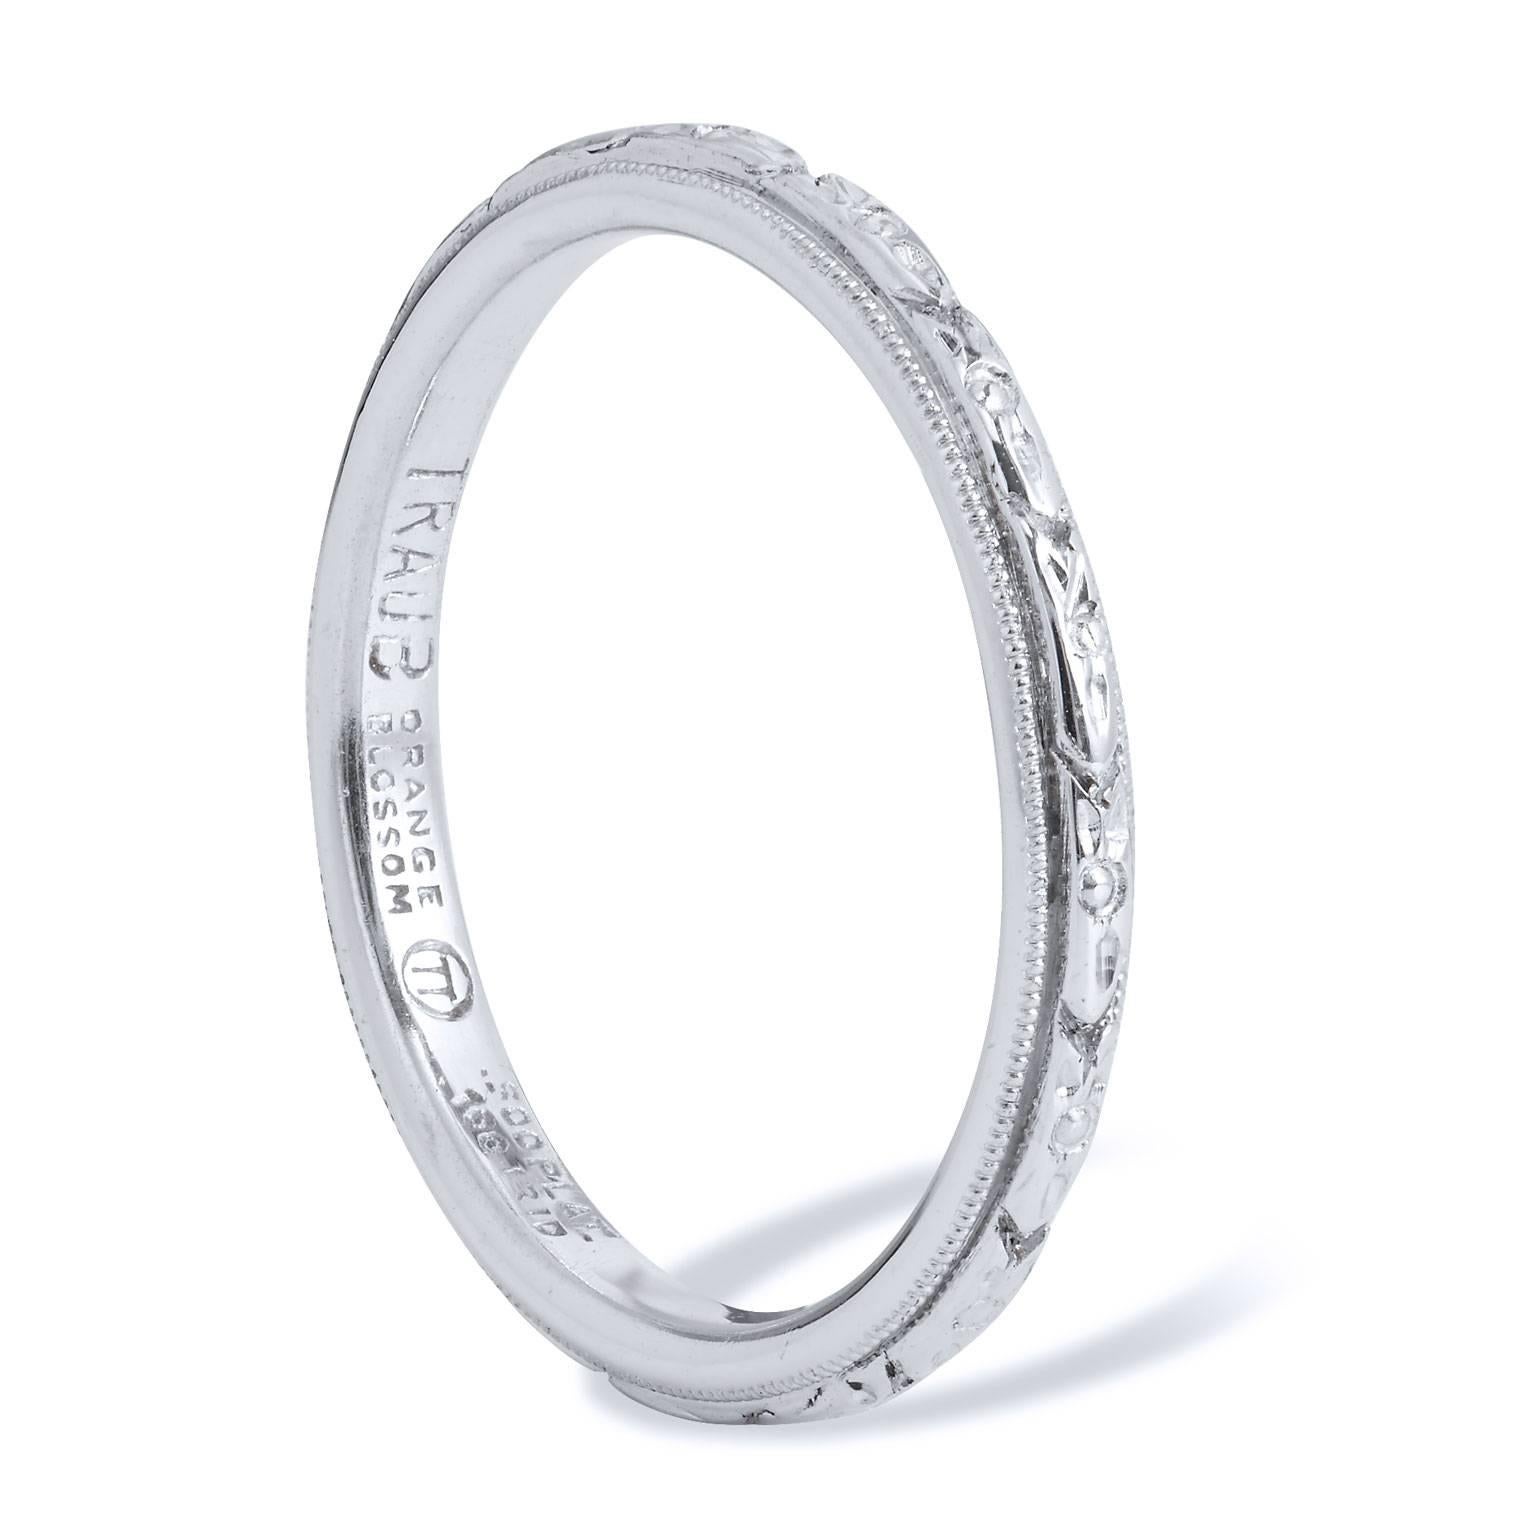 Simplicity reigns supreme with this previously loved, in pristine condition, platinum band with eternity engraving.
Size 6 